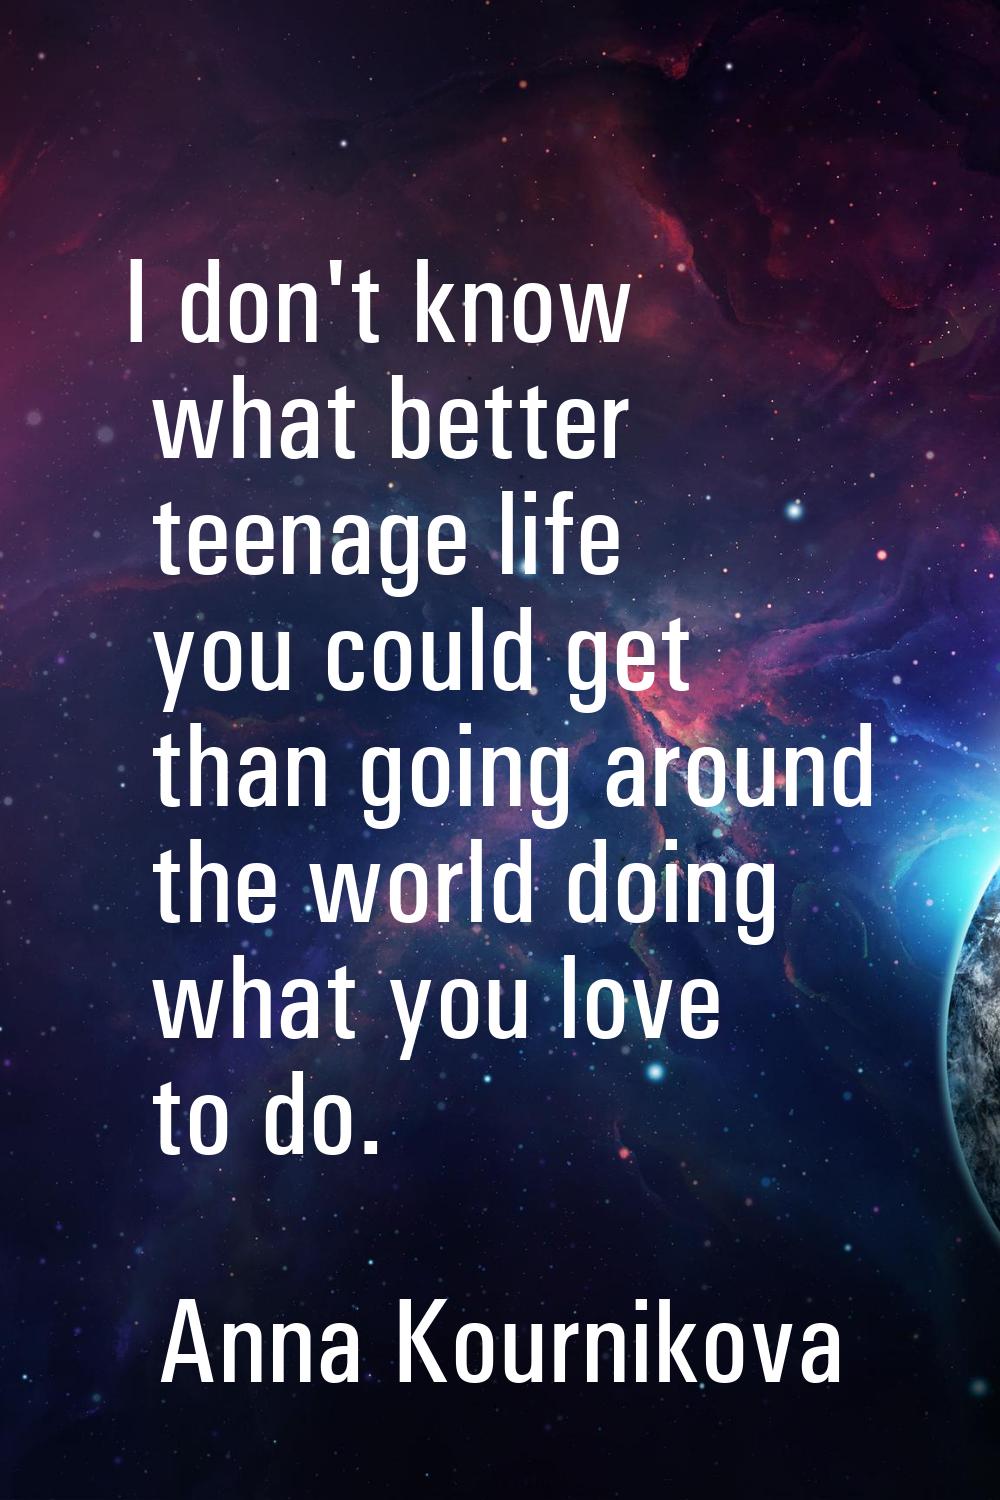 I don't know what better teenage life you could get than going around the world doing what you love